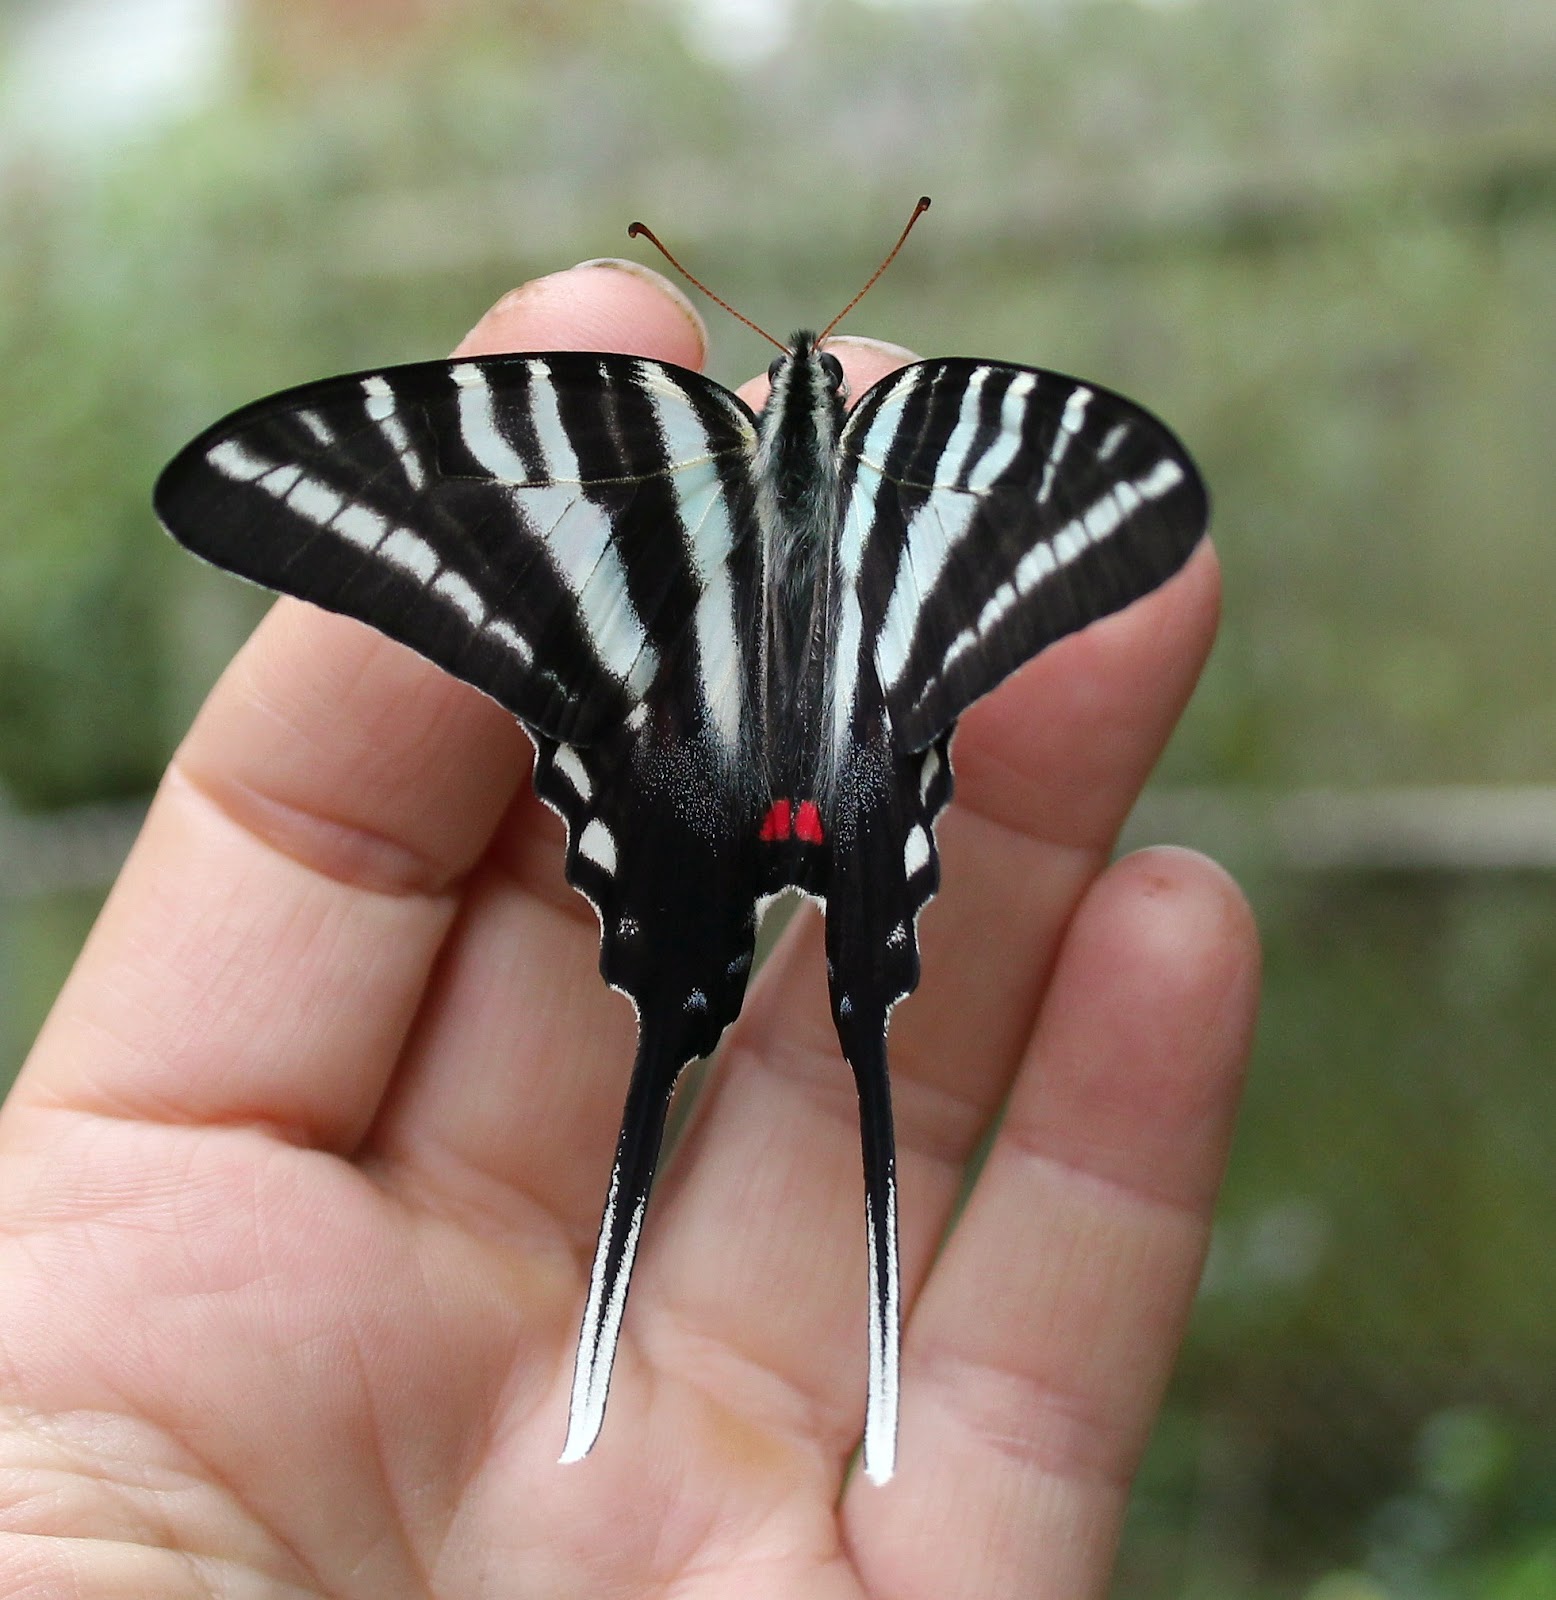 On the Wing: How to Grow a Zebra Swallowtail Butterfly!